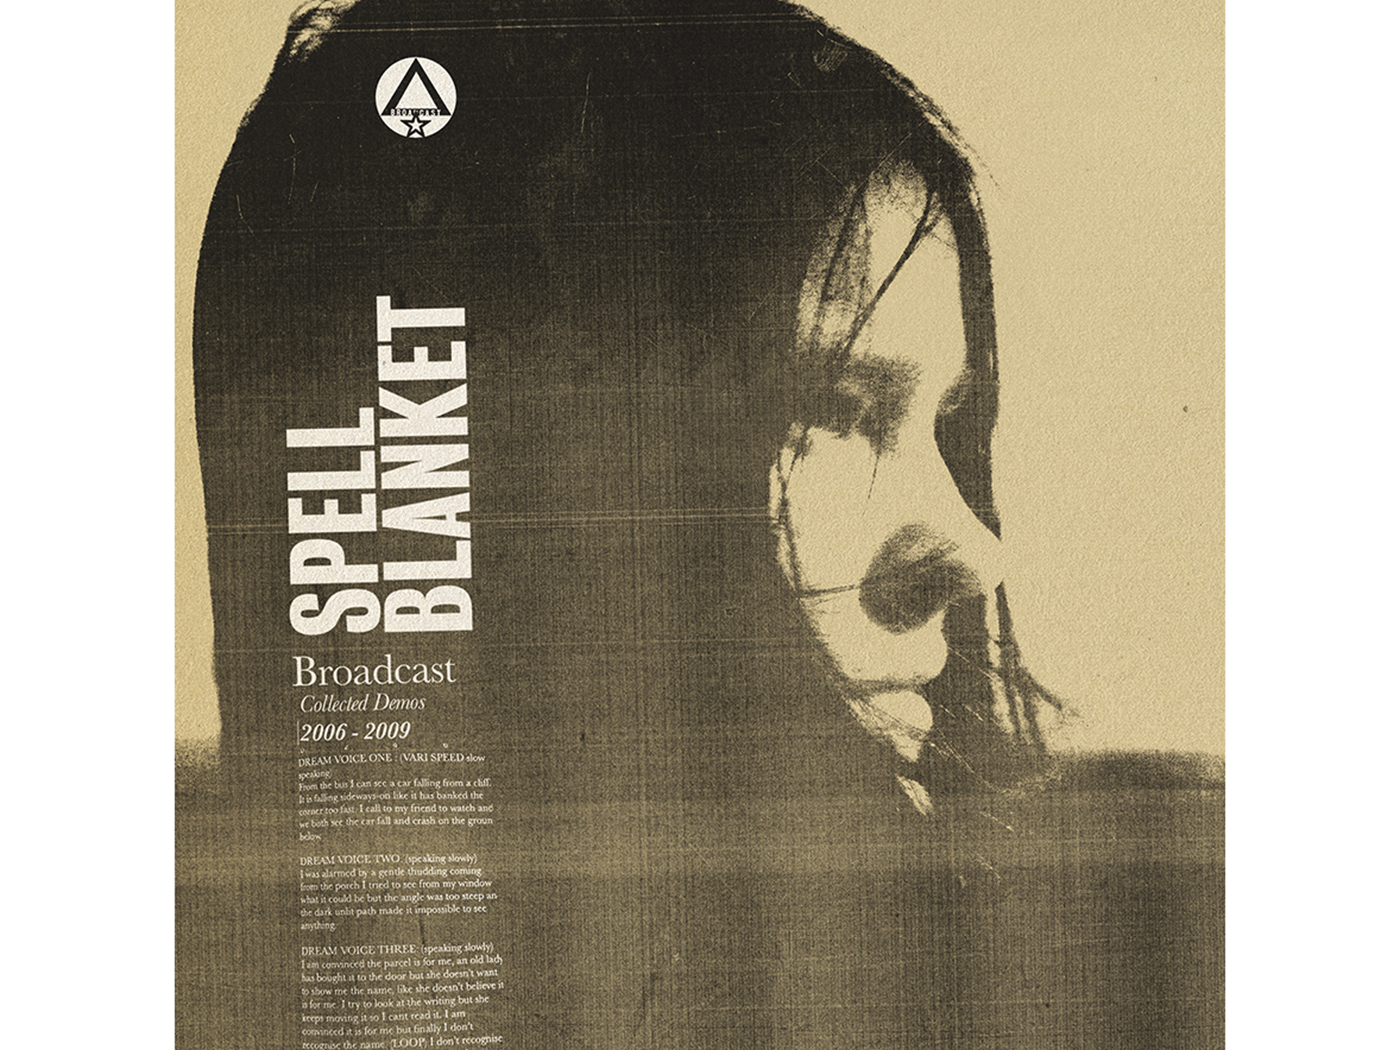 Broadcast - Spell Blanket – Collected Demos 2006-2009